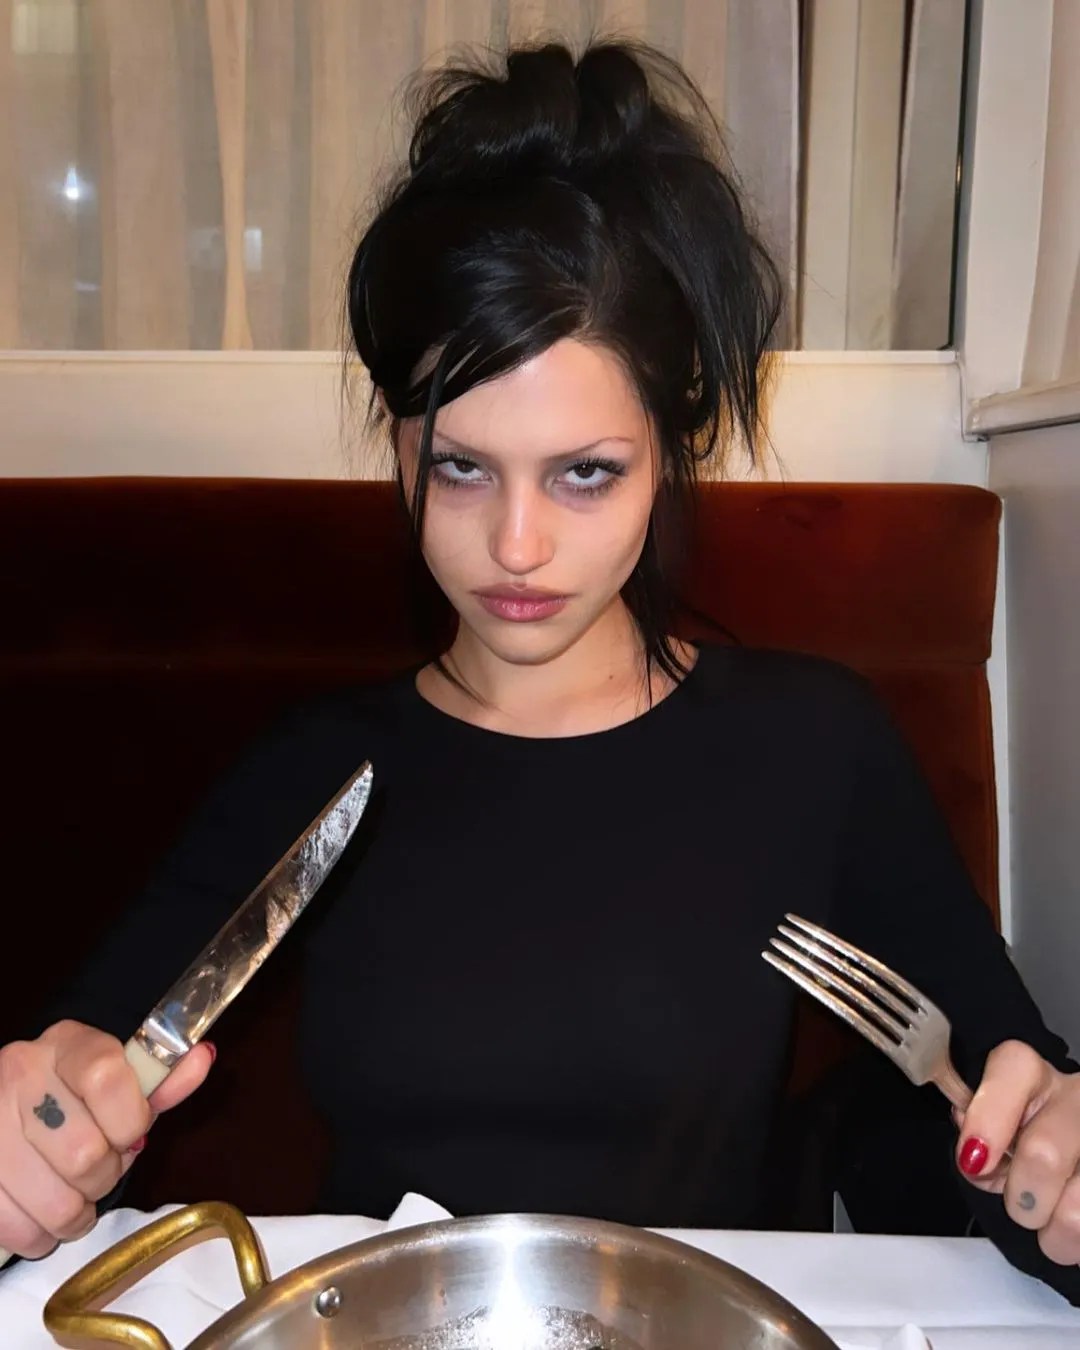 Rising Model and Goth Girl Gabbriette Moonlights as an Instagram Chef